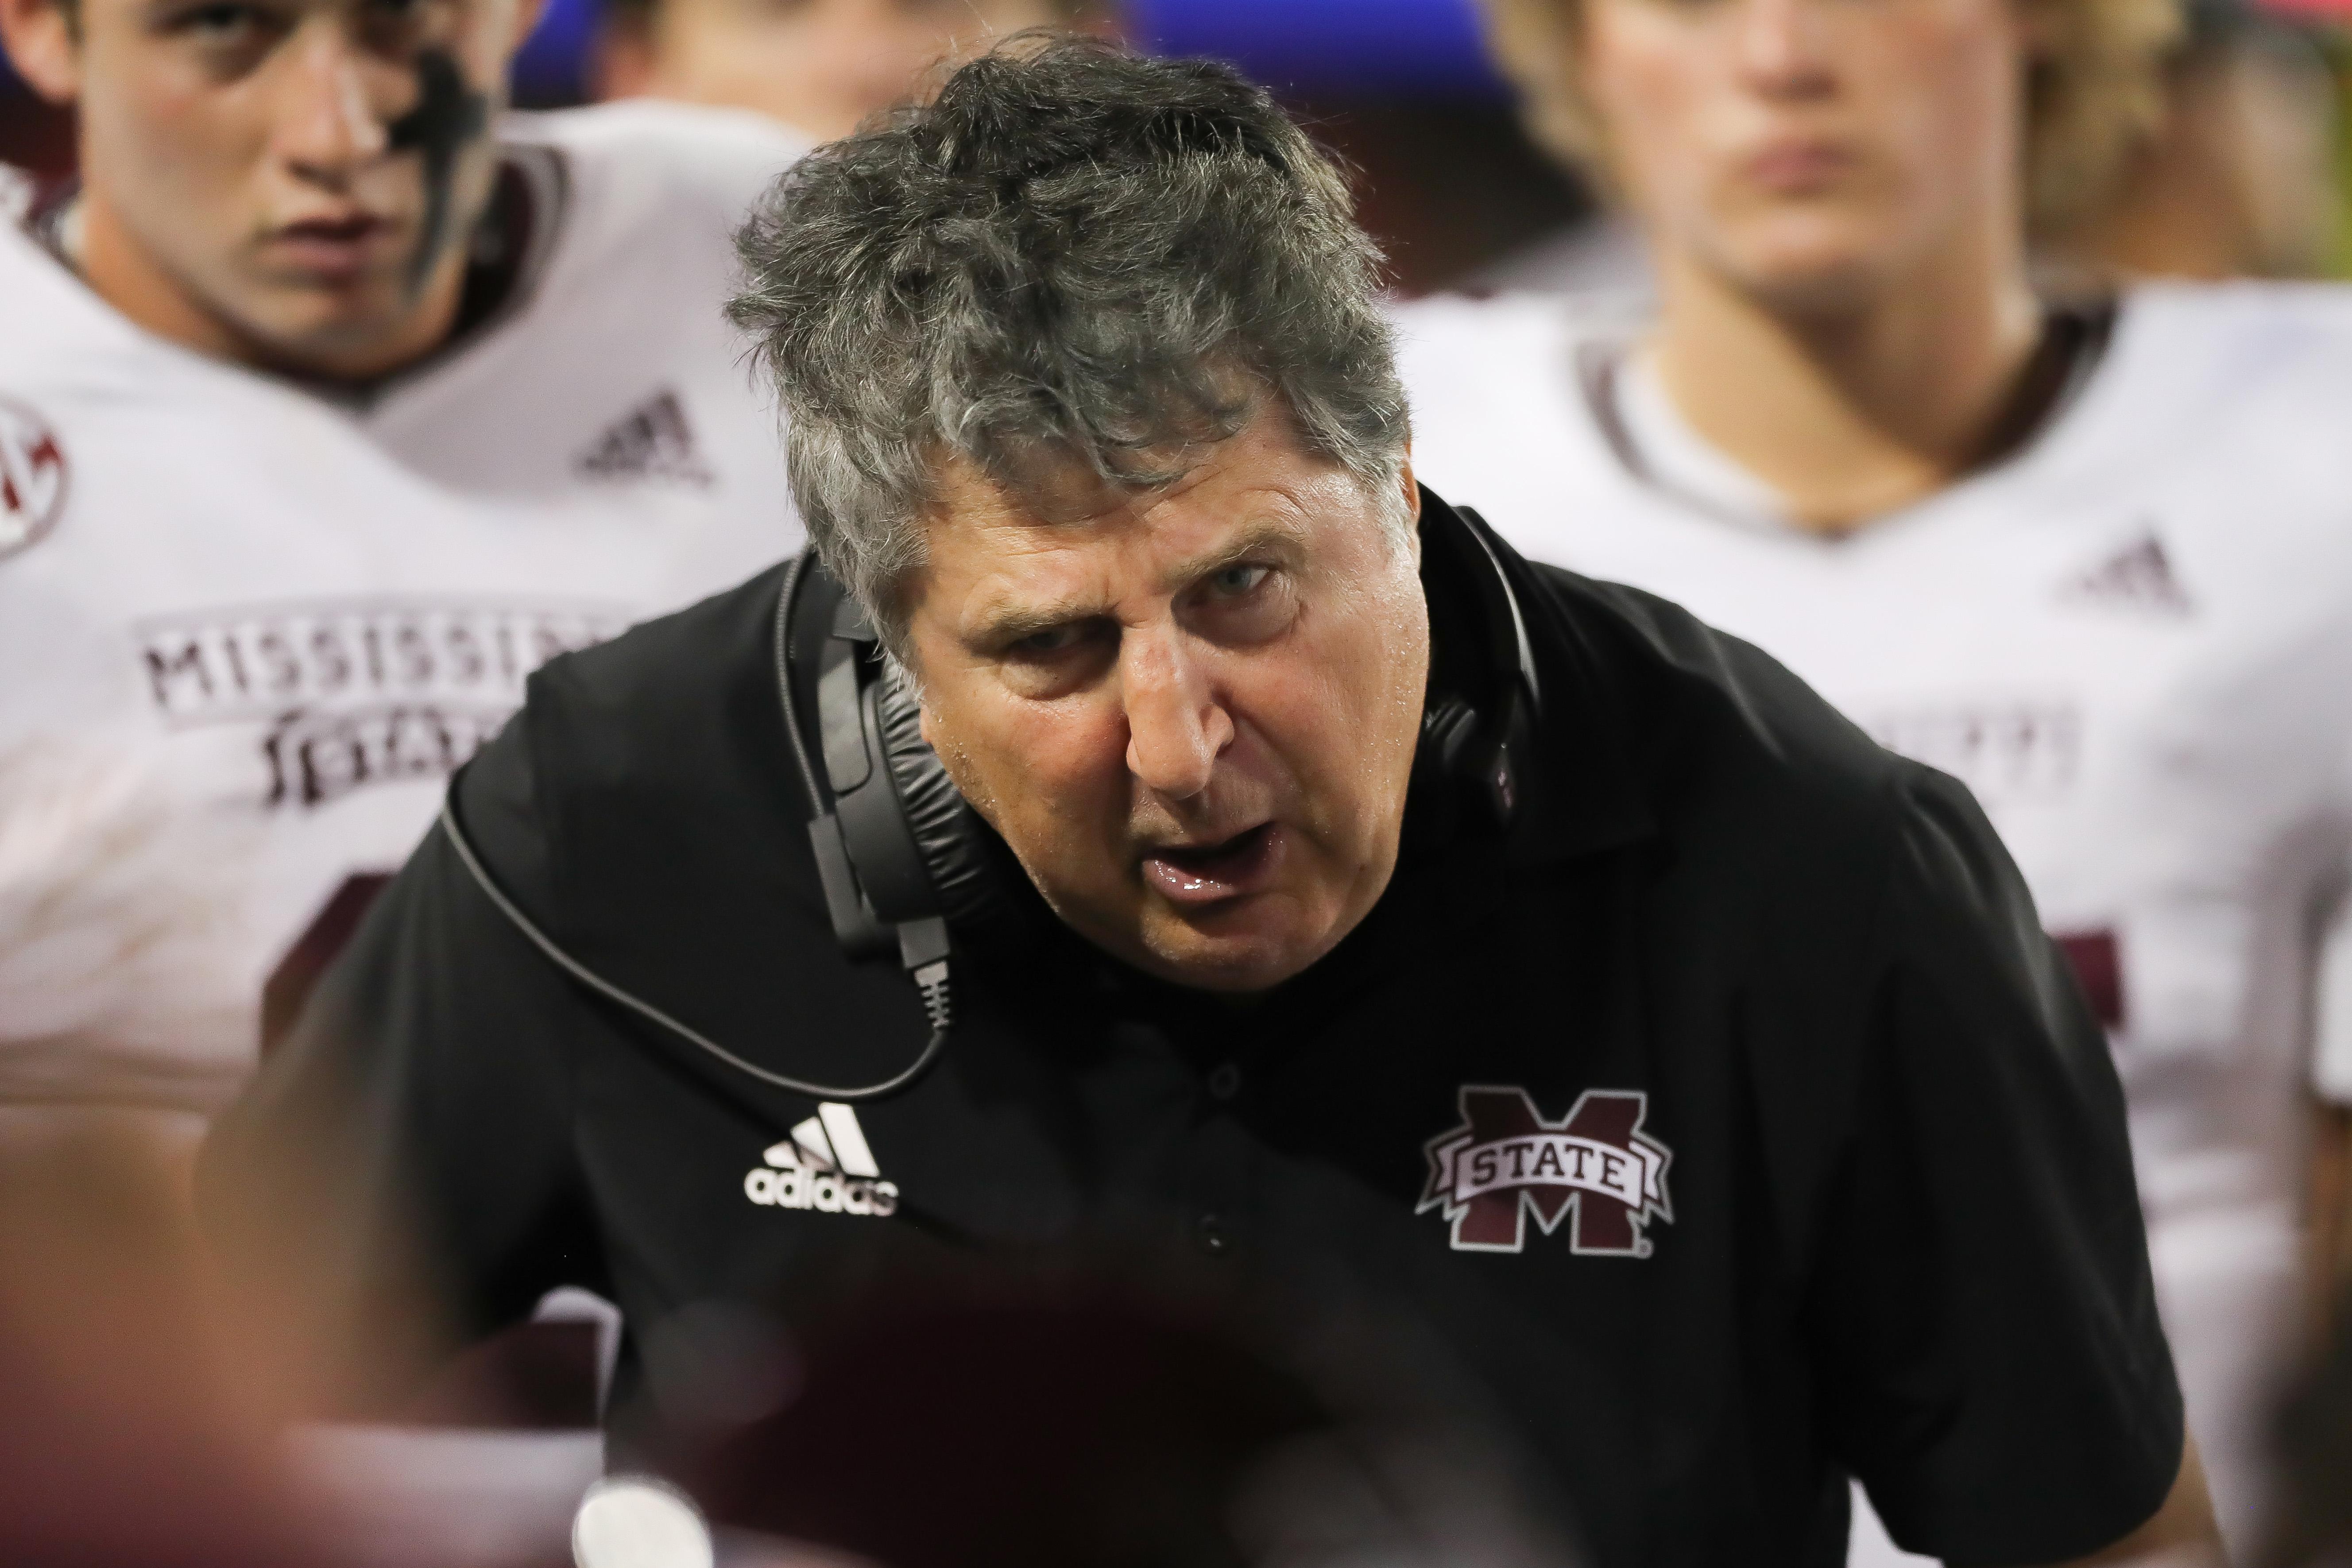 Leach on the sideline, in a headset leaning over and speaking to players